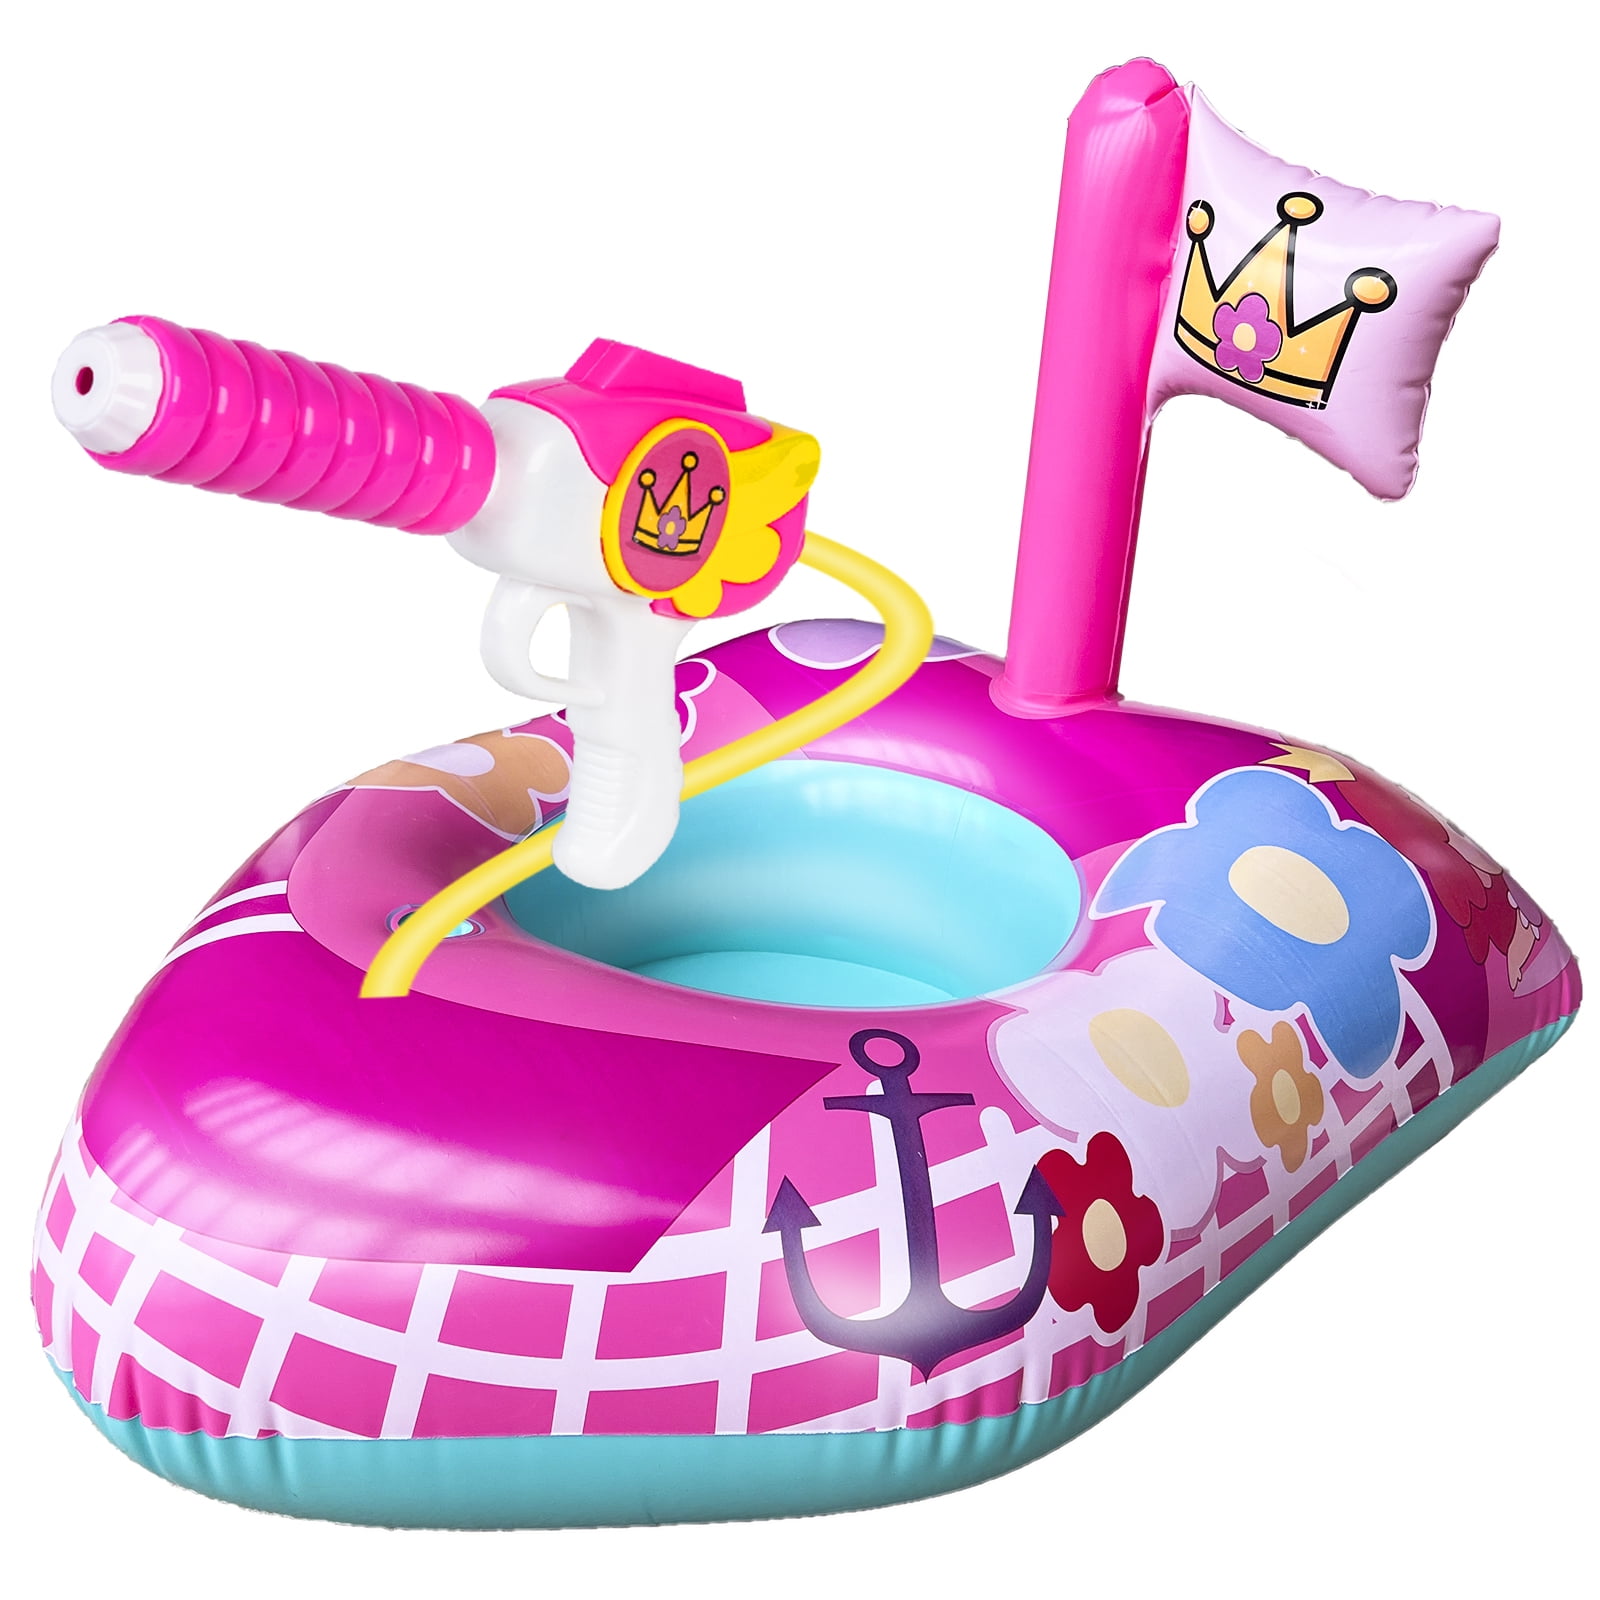 10Leccion Toddler Pool Float for Girls with Squirt Gun, Pink Inflatable Pool Toys for Kids